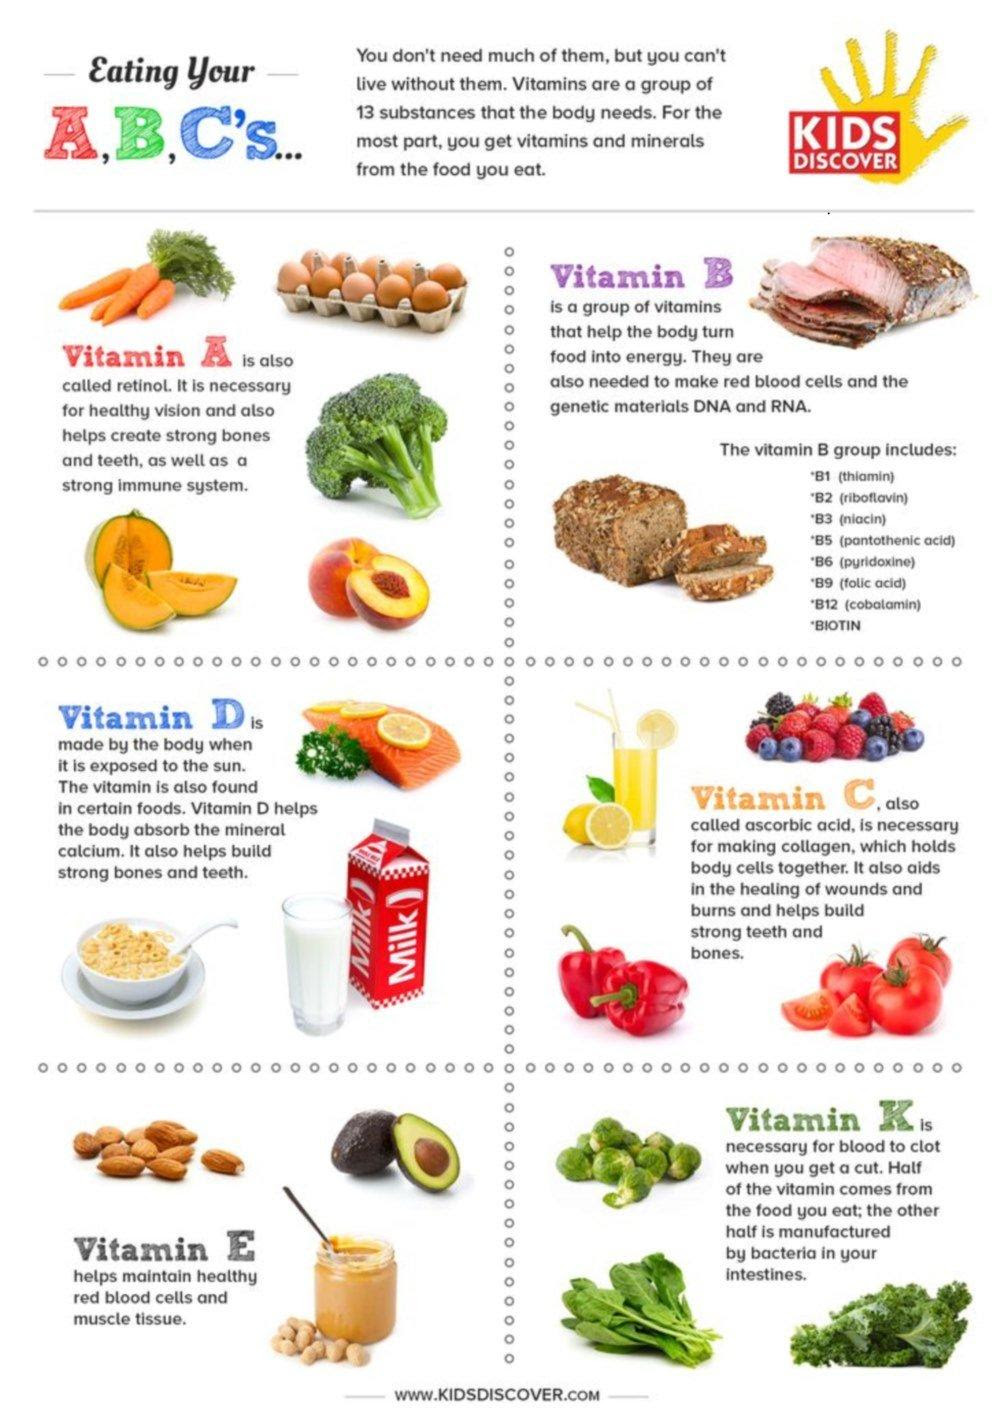 What Are The Warning Signs That Your Body Lacks Vitamins?